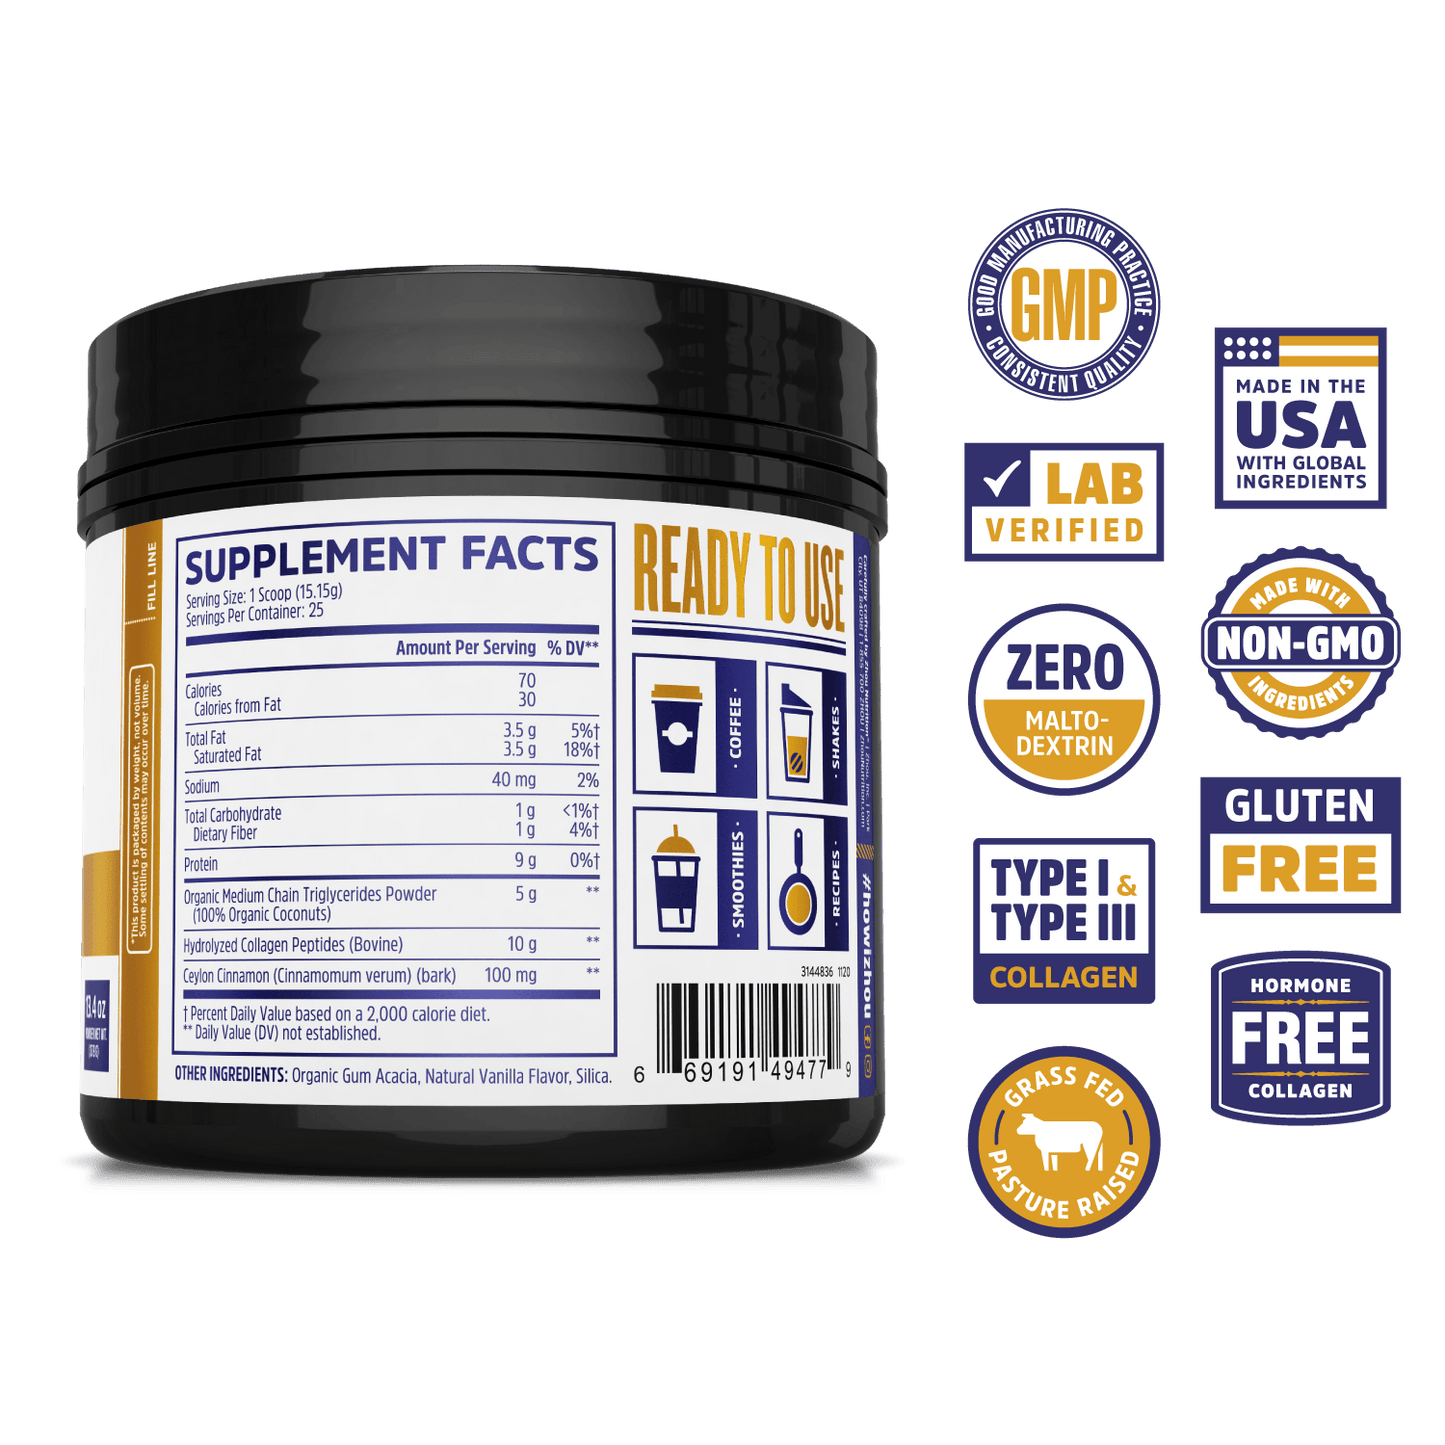 Zhou Nutrition MCT Collagen powder supplement. Lab verified, good manufacturing practices, made in the USA with global ingredients, made with non-GMO ingredients, gluten free